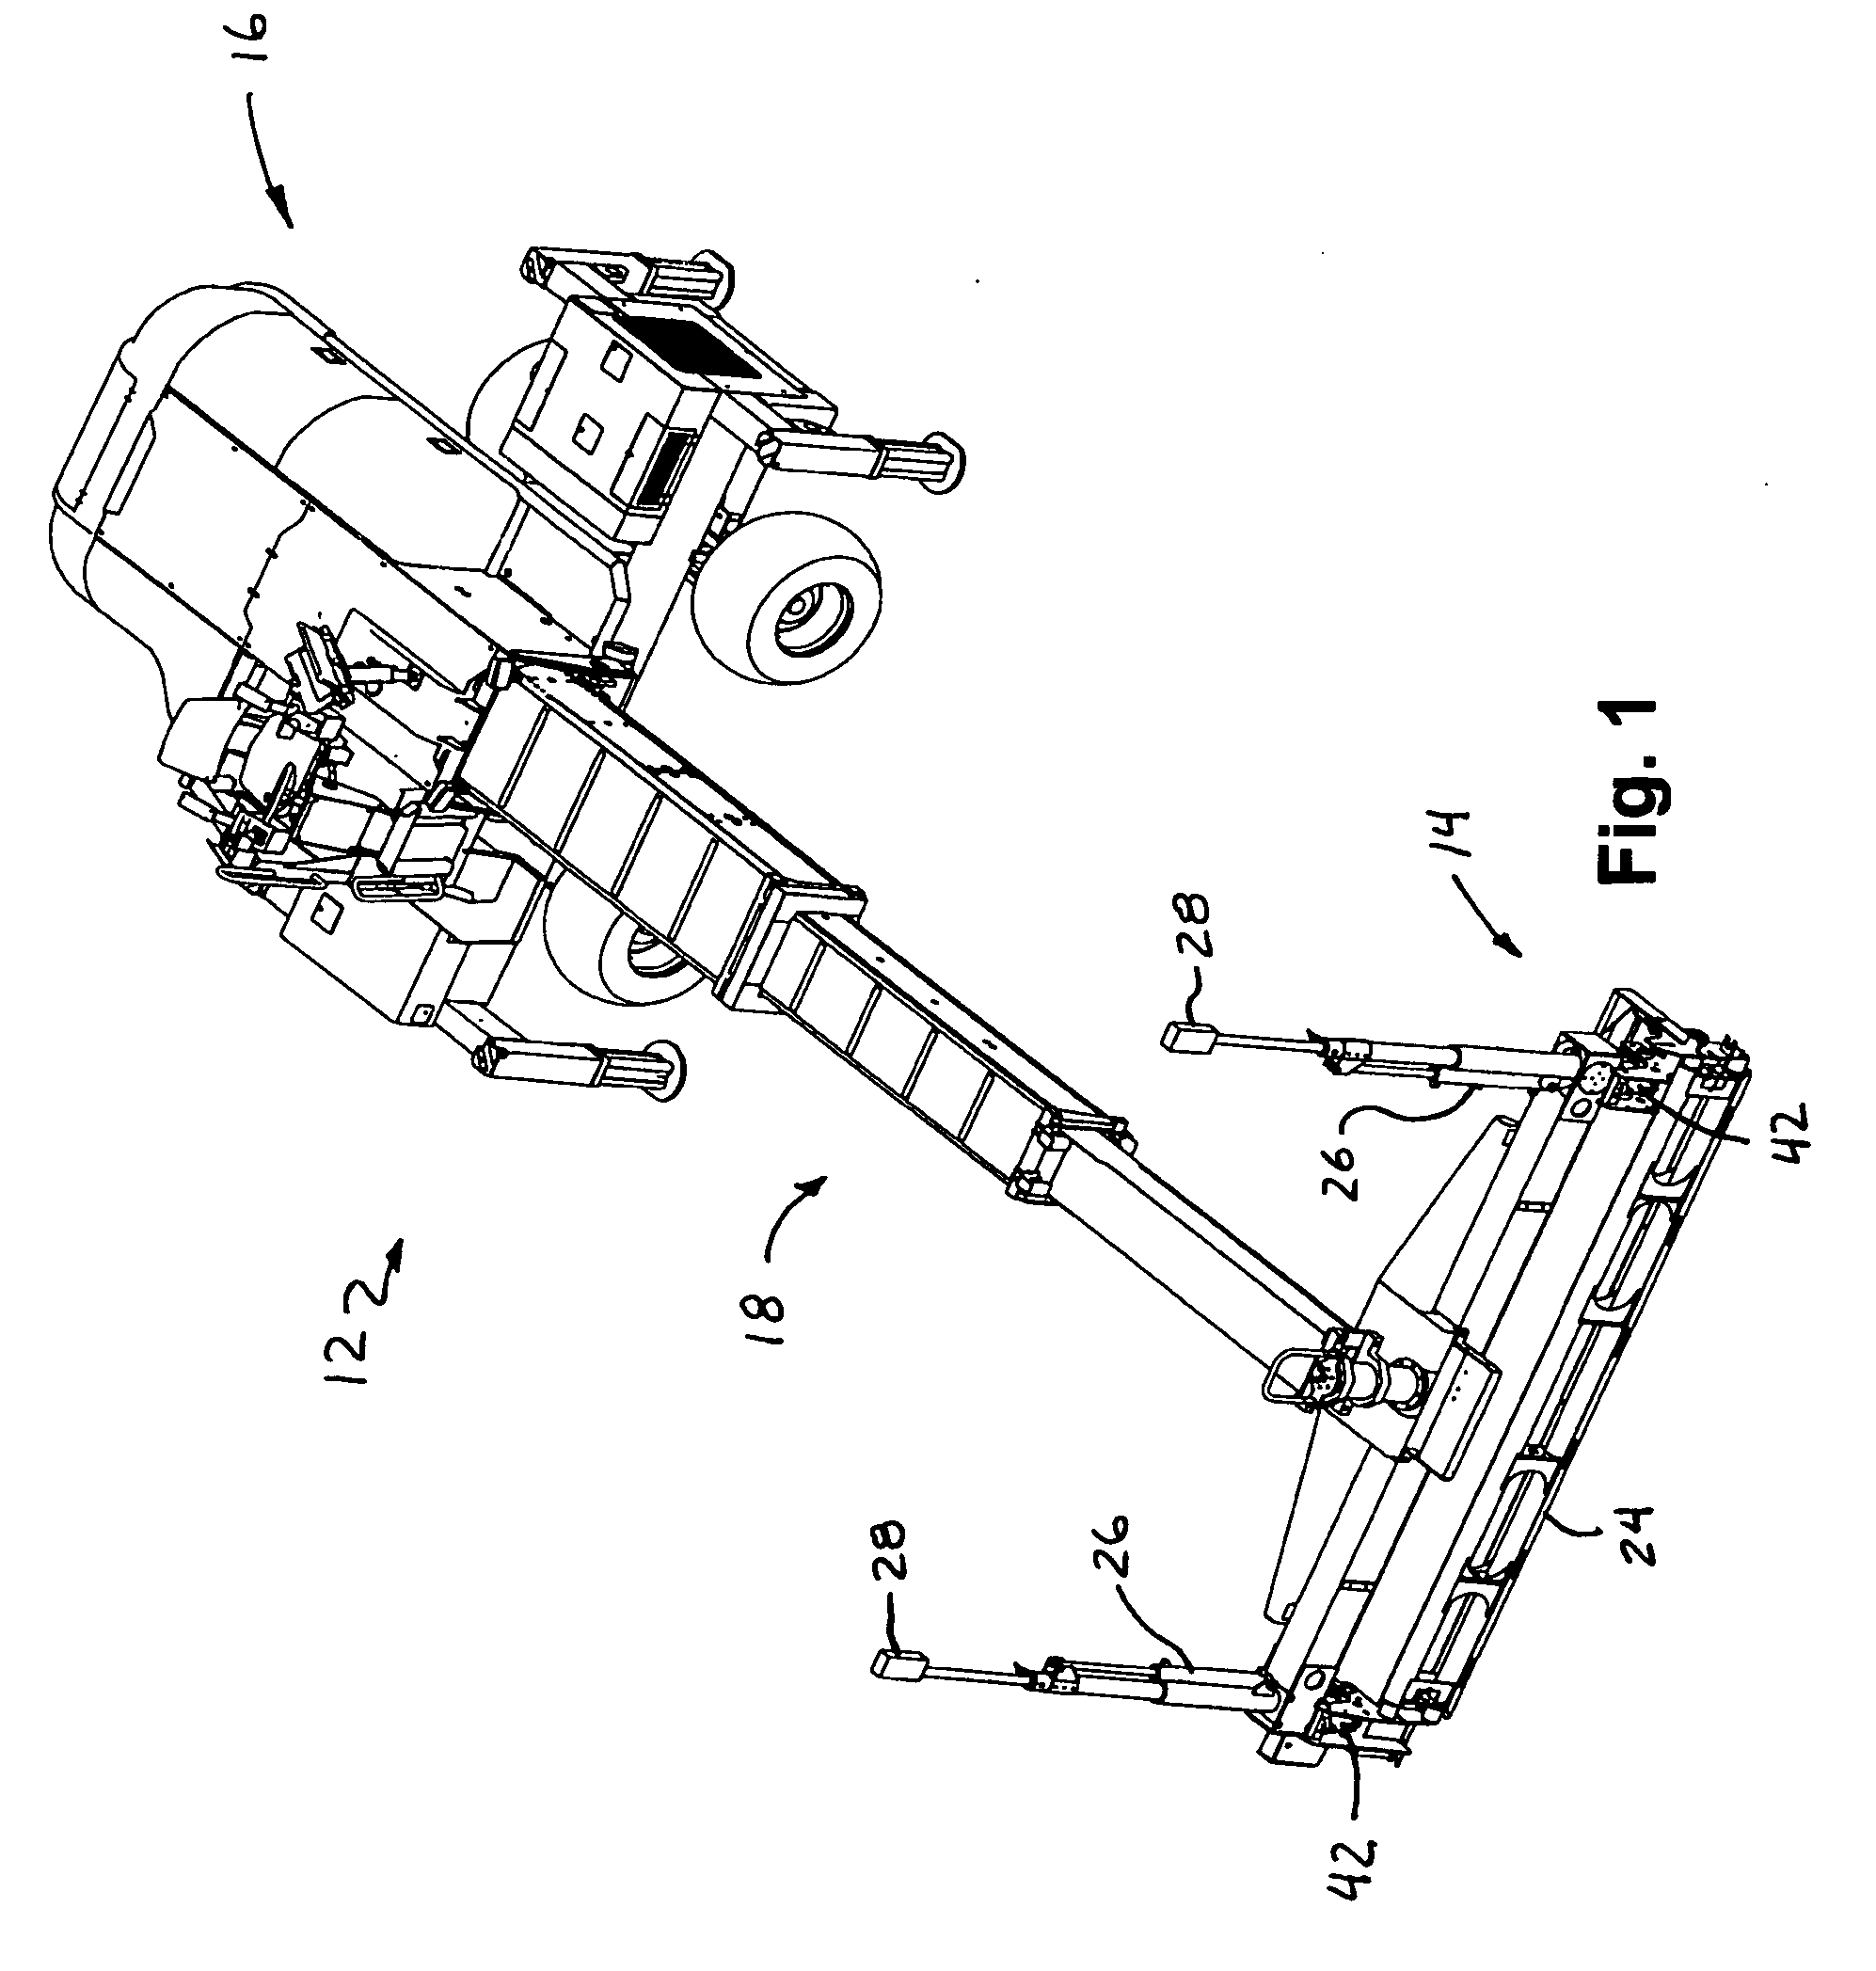 Apparatus and method for improving the control of a concrete screed head assembly